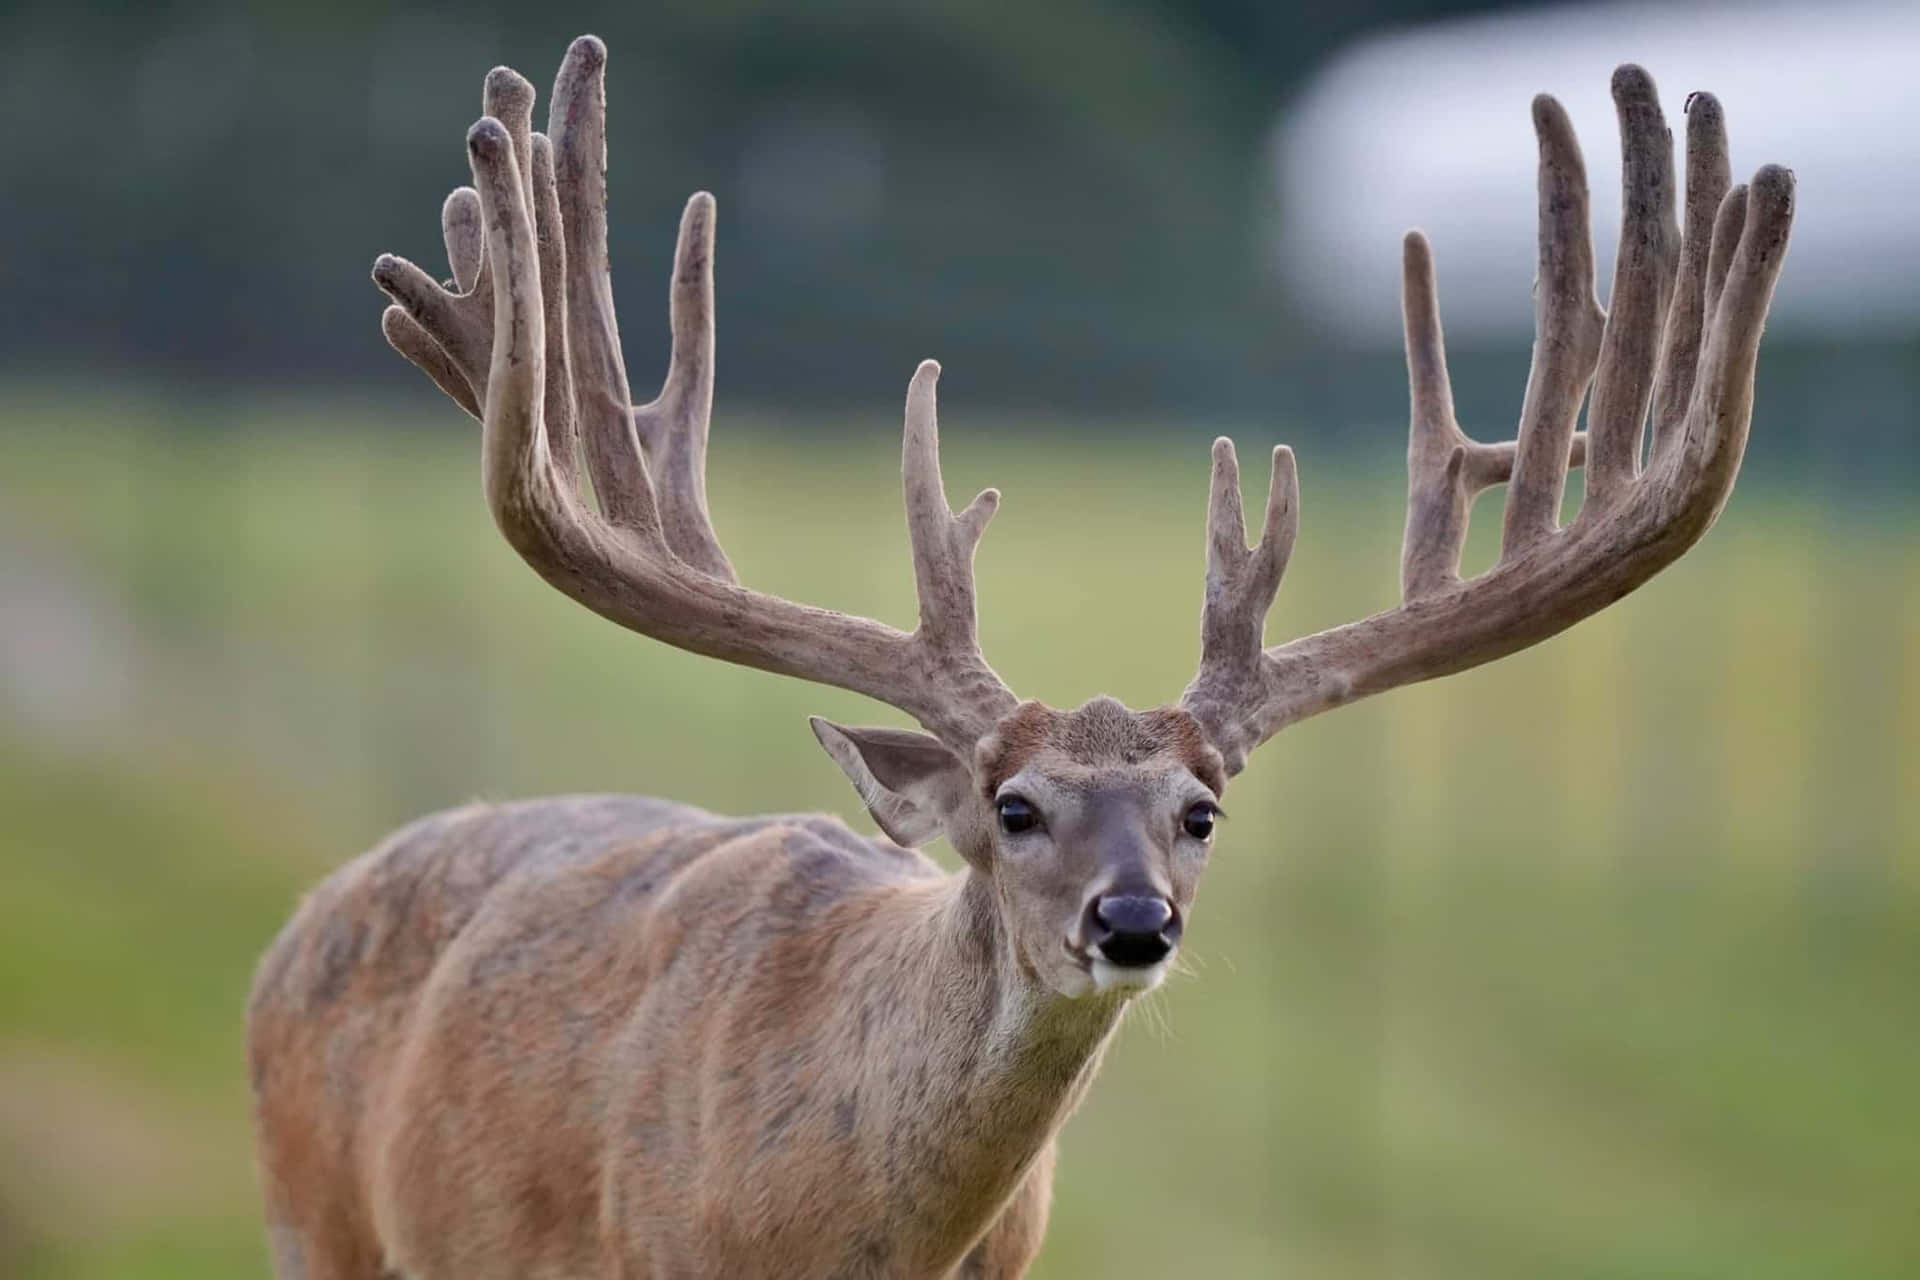 a large deer with large antlers standing in a field Wallpaper